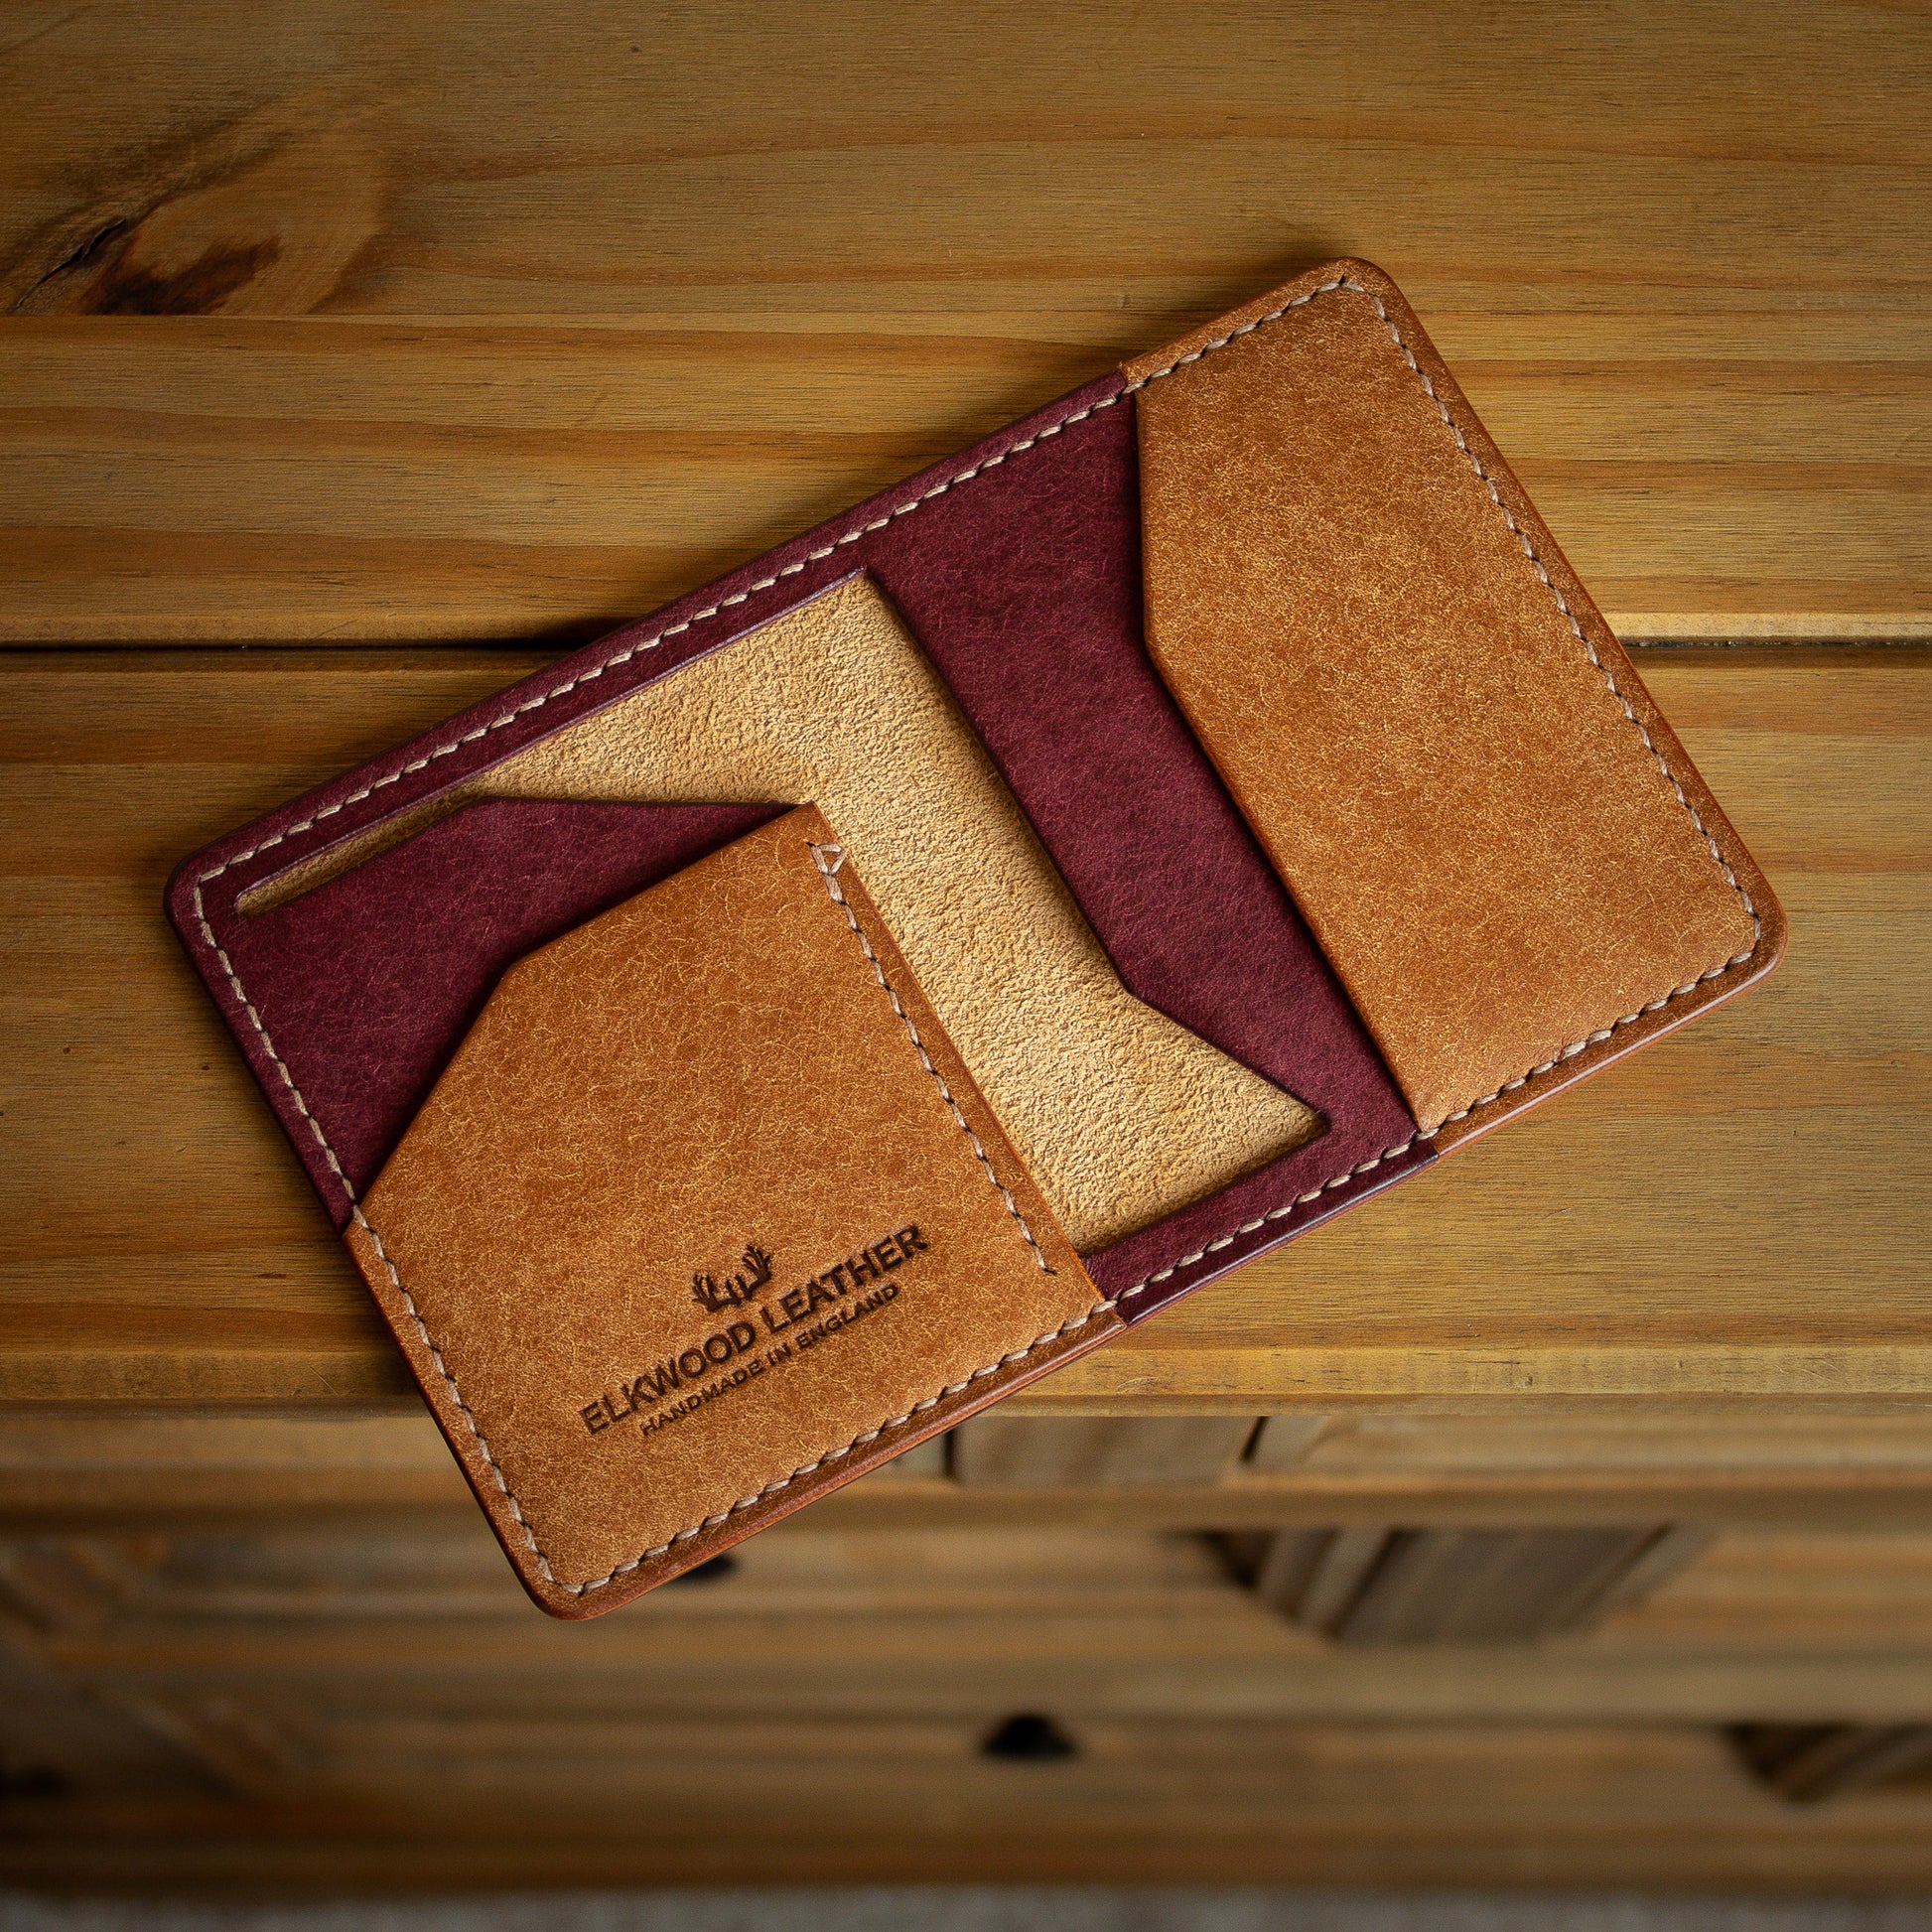 Brown and red "The Cedar" leather wallet open on wooded sideboard